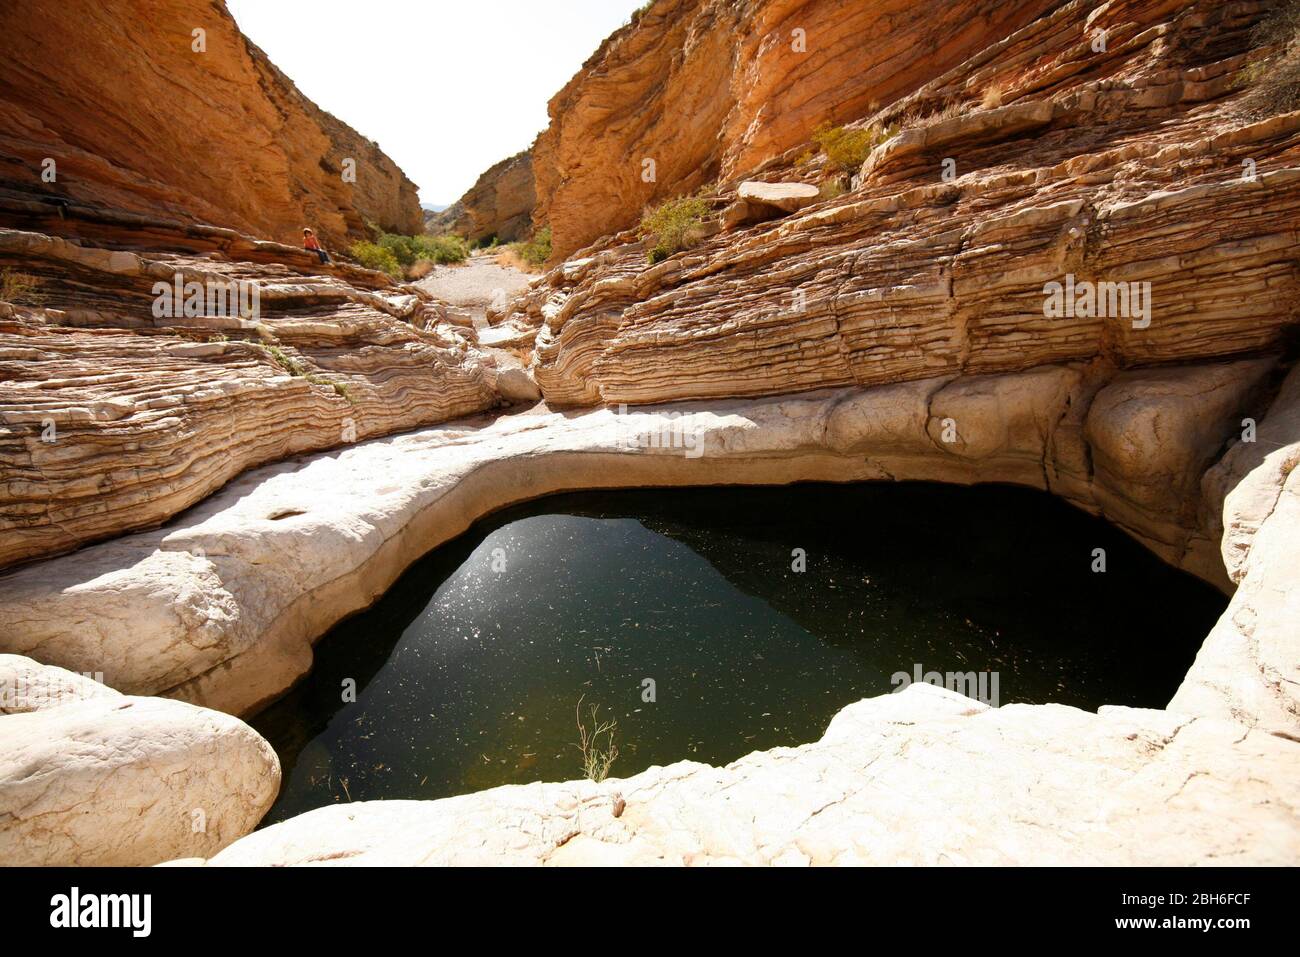 Big Bend National Park, Texas, March 17, 2009: Historical site of Ernst Tinaja, a small oasis of water in the Big Bend desert along the Old Ore Road in Big Bend National Park, situated on the remote Texas-Mexico border.  ©Bob Daemmrich Stock Photo